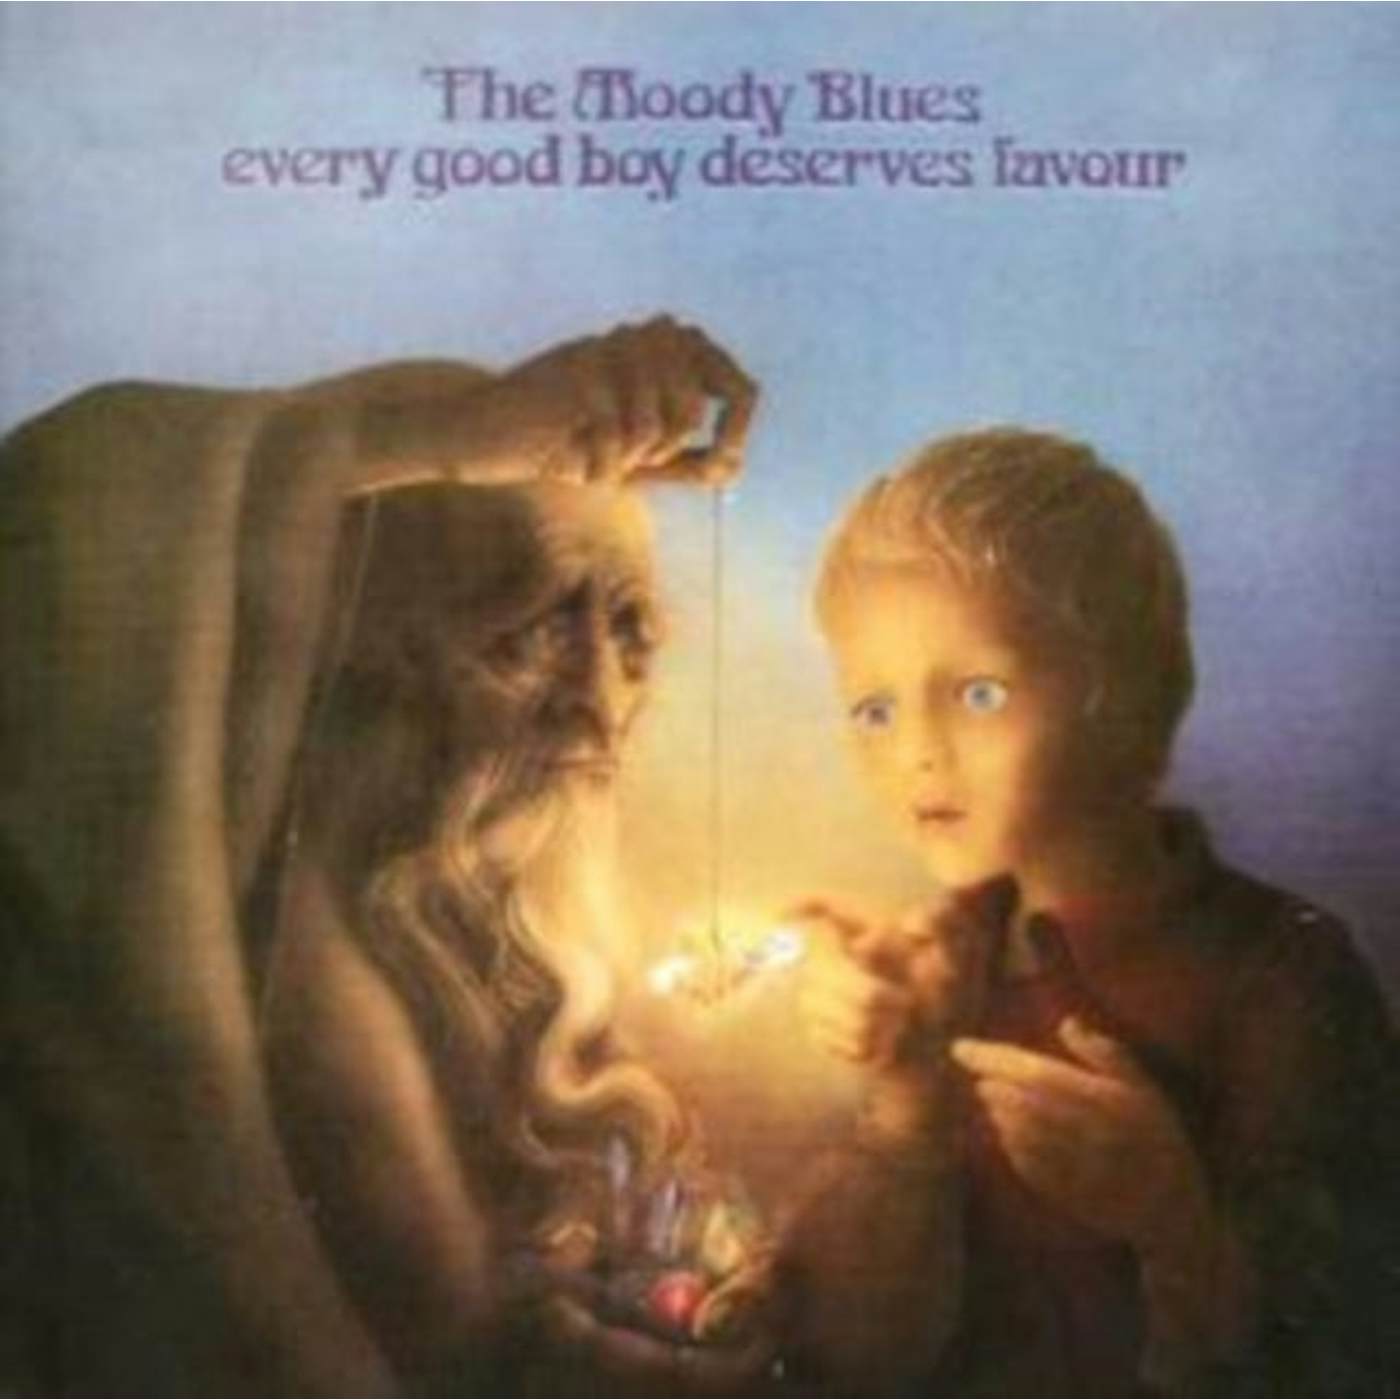 The Moody Blues CD - Every Good Boy Deserves Favour